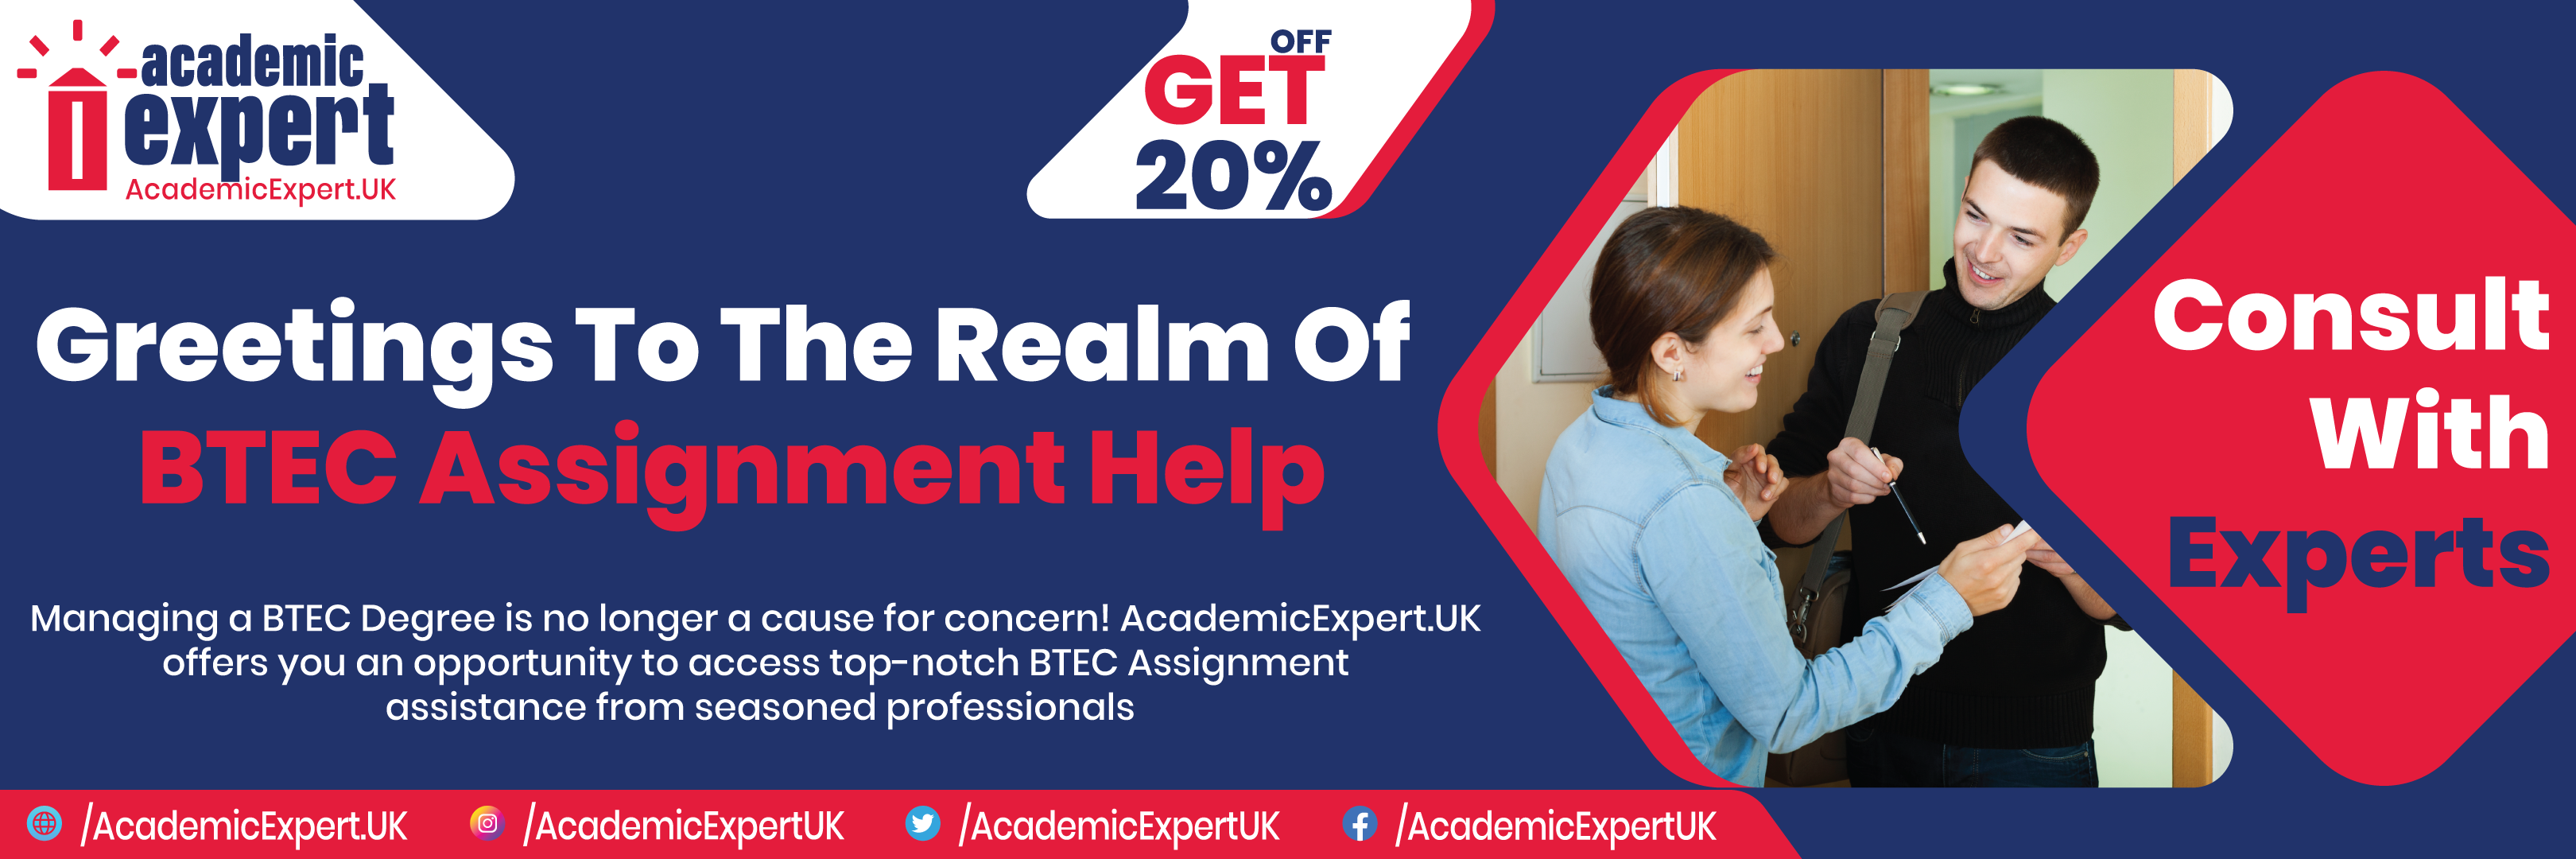 Greetings To The Realm Of BTEC Assignment Help